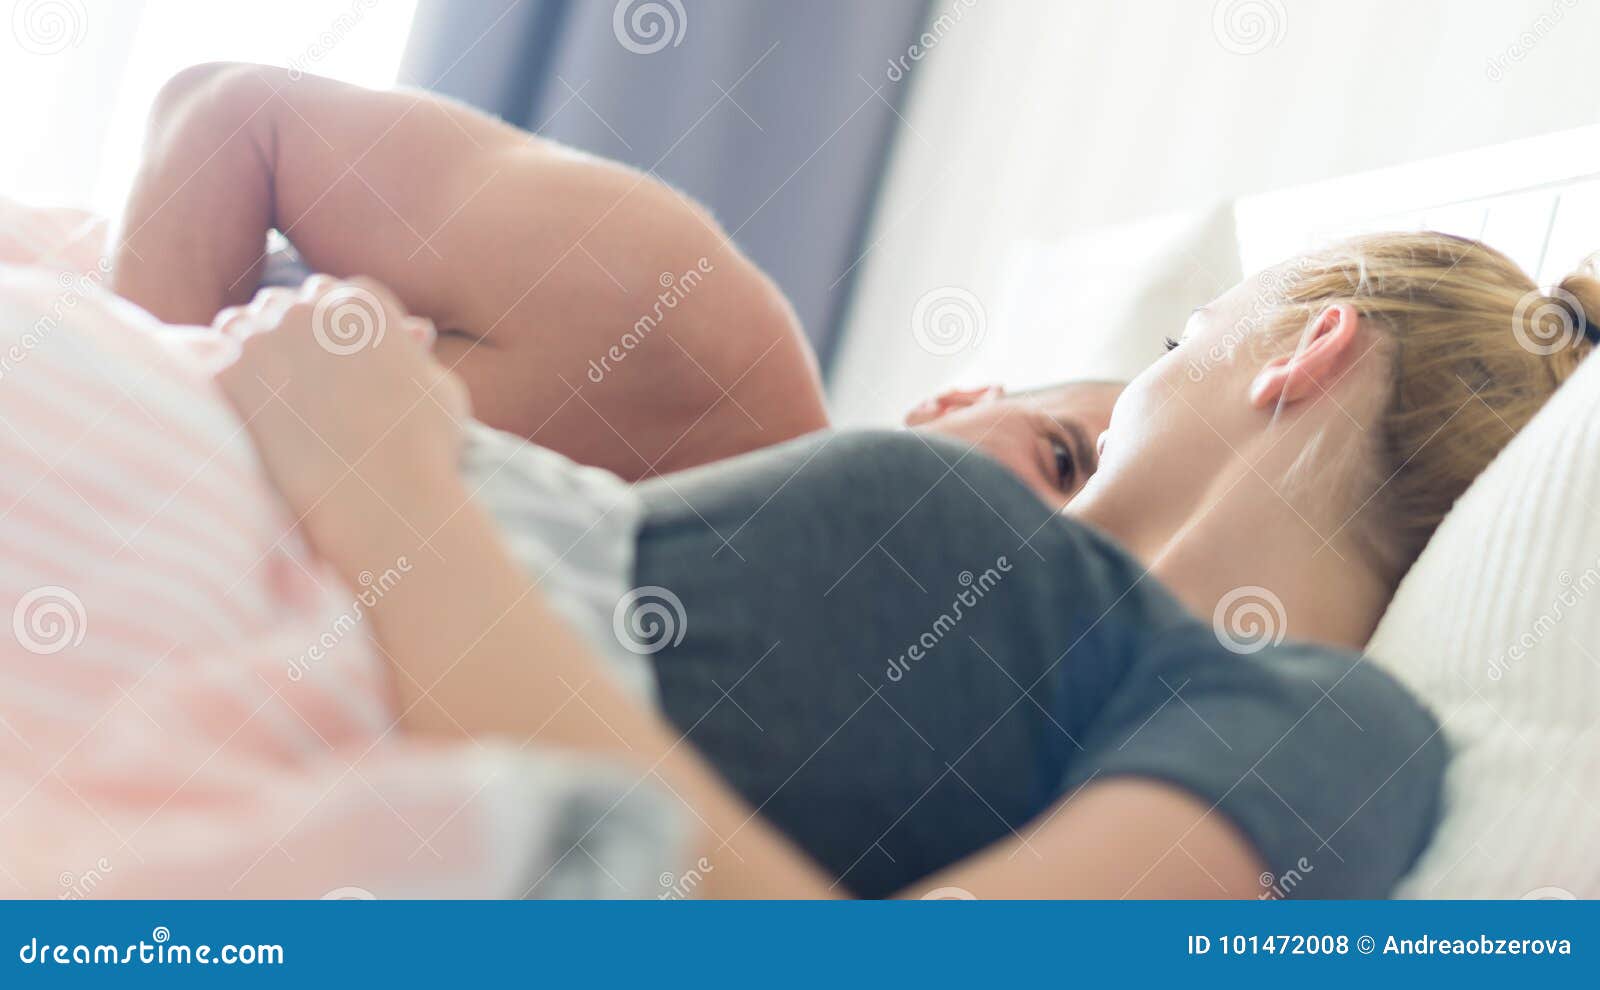 Young Sensual Couple in Their Bedroom Looking Lovingly at Each Other Stock Photo